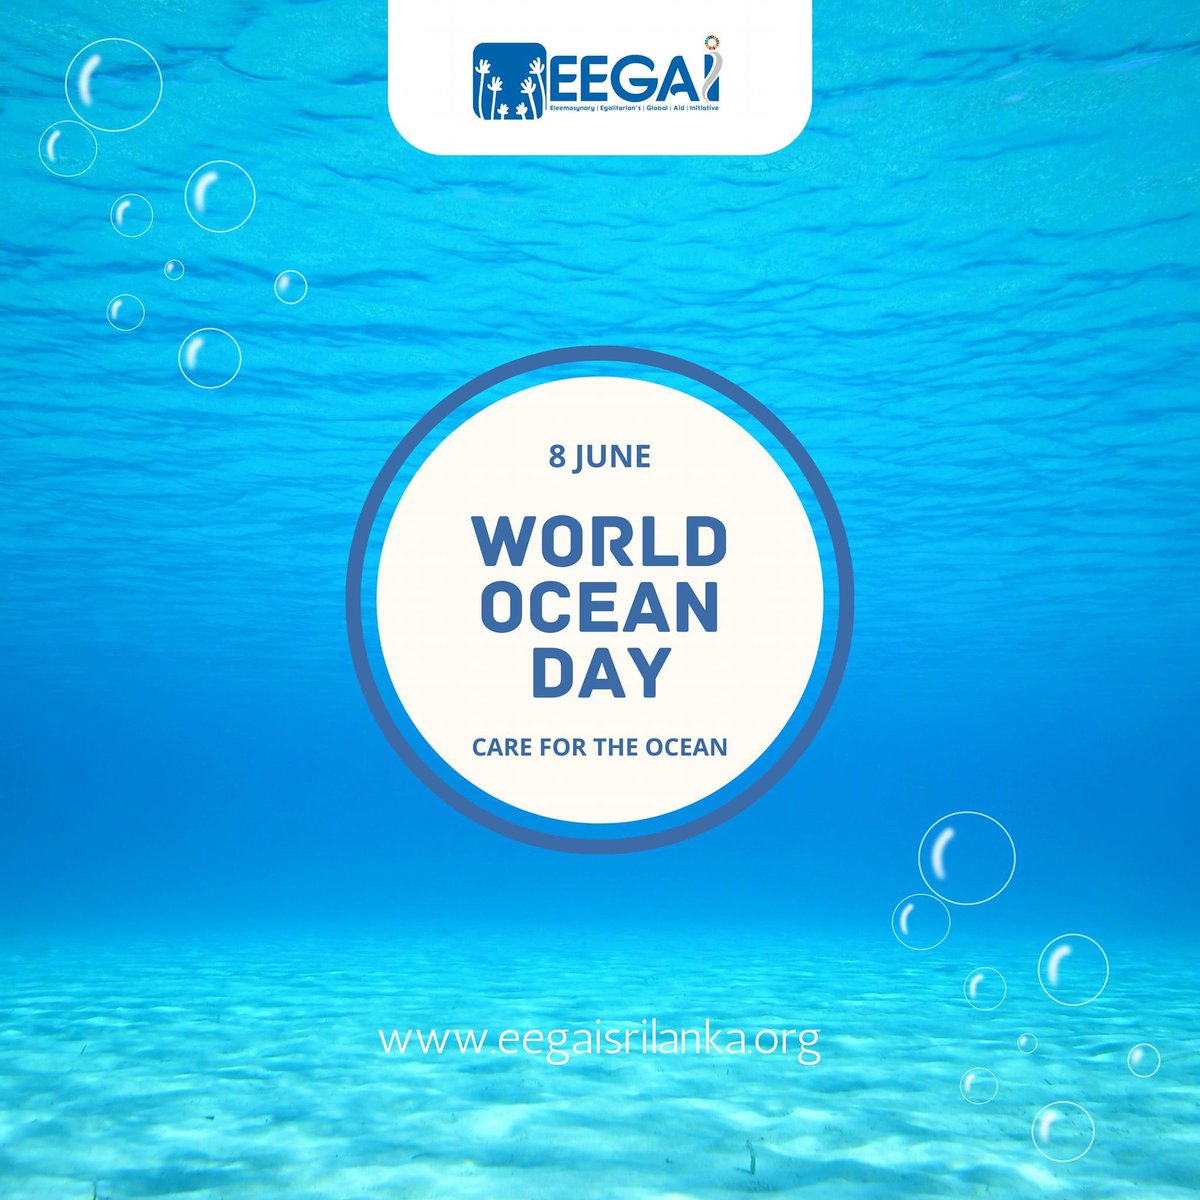 🌍At EEGAI, we recognize the vital role of oceans in sustaining life on our planet. They provide us with food, regulate our climate, and are home to incredible biodiversity. Join us in taking action to preserve our oceans for future generations. 

#WorldOceanDay #EEGAI